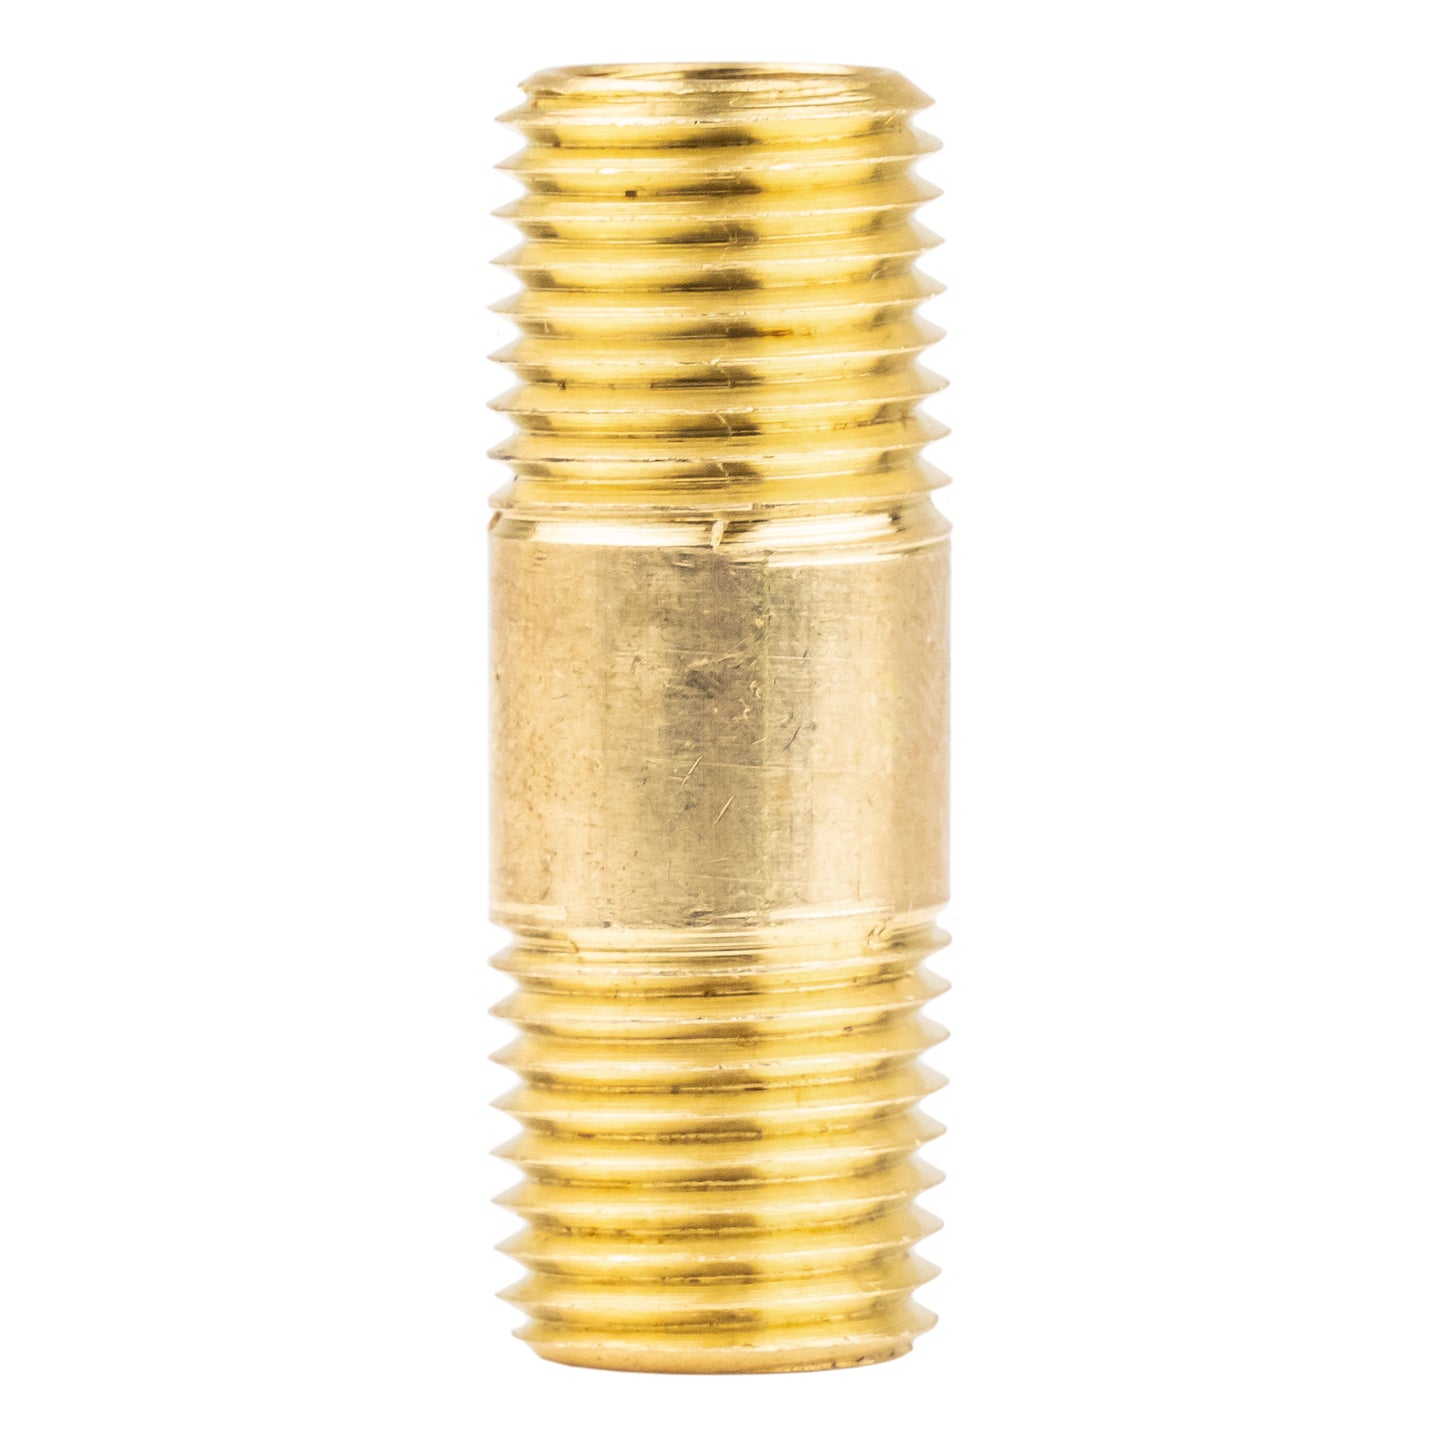 1/4" NPT x 1.5" Long Male Pipe Nipples Threaded Brass Fittings Connectors 5 Pack